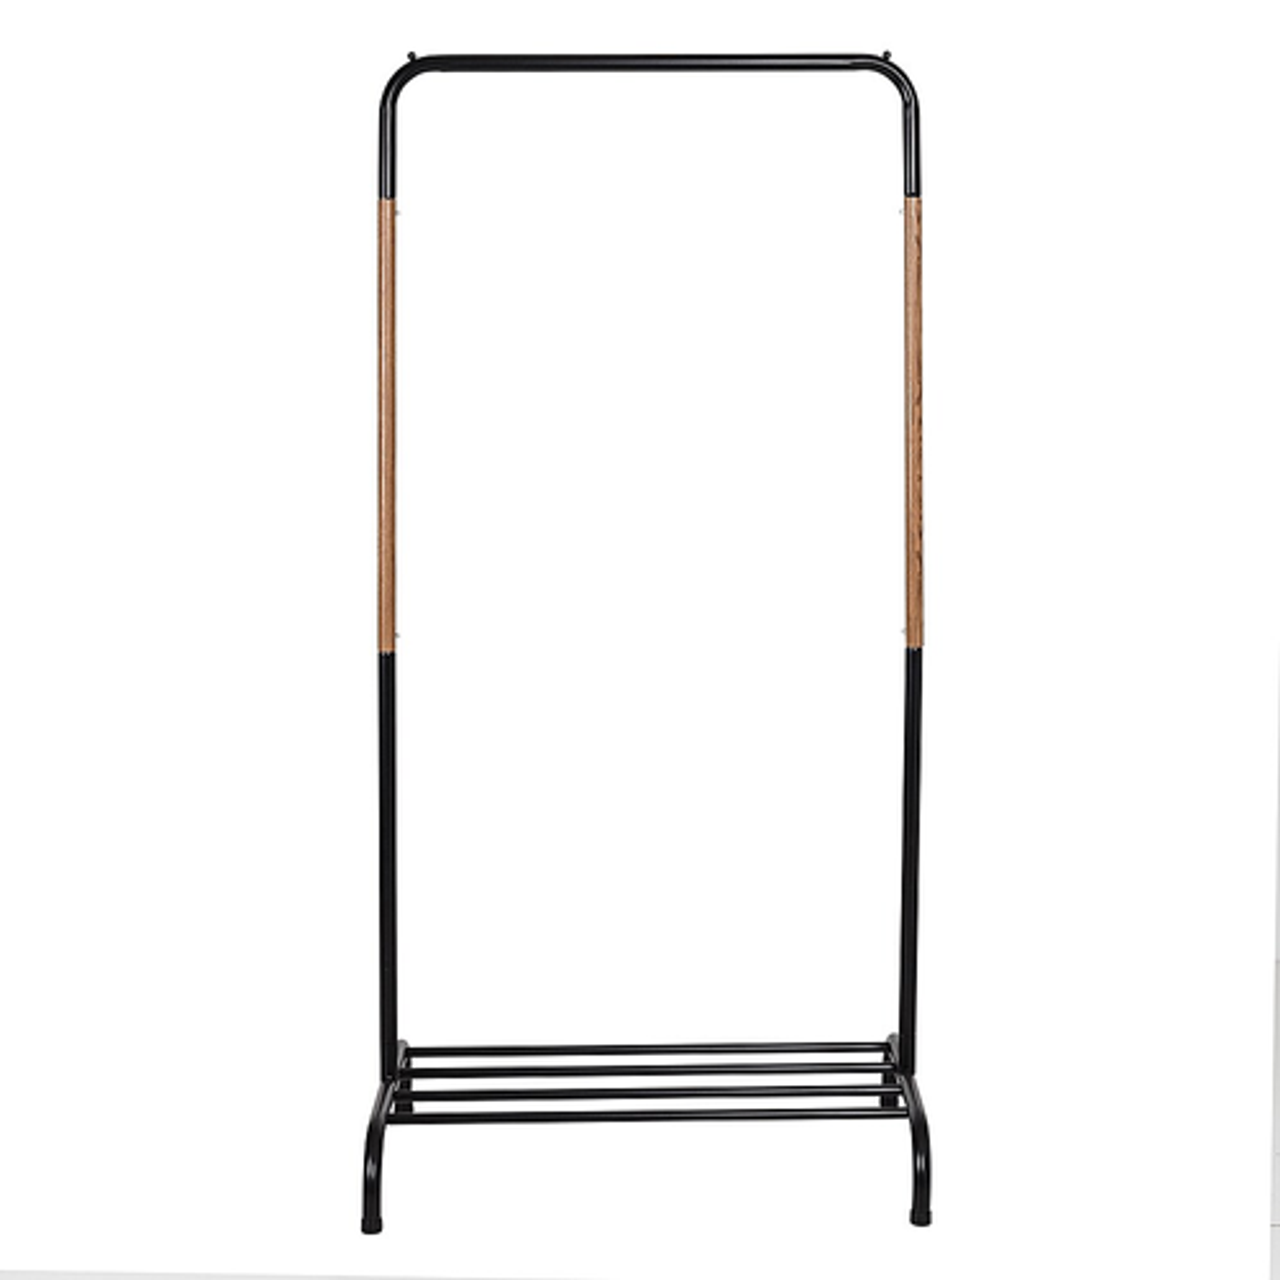 Honey-Can-Do - Single Garment Rack with Shoe Shelf and Hanging Bar for Clothes - Black